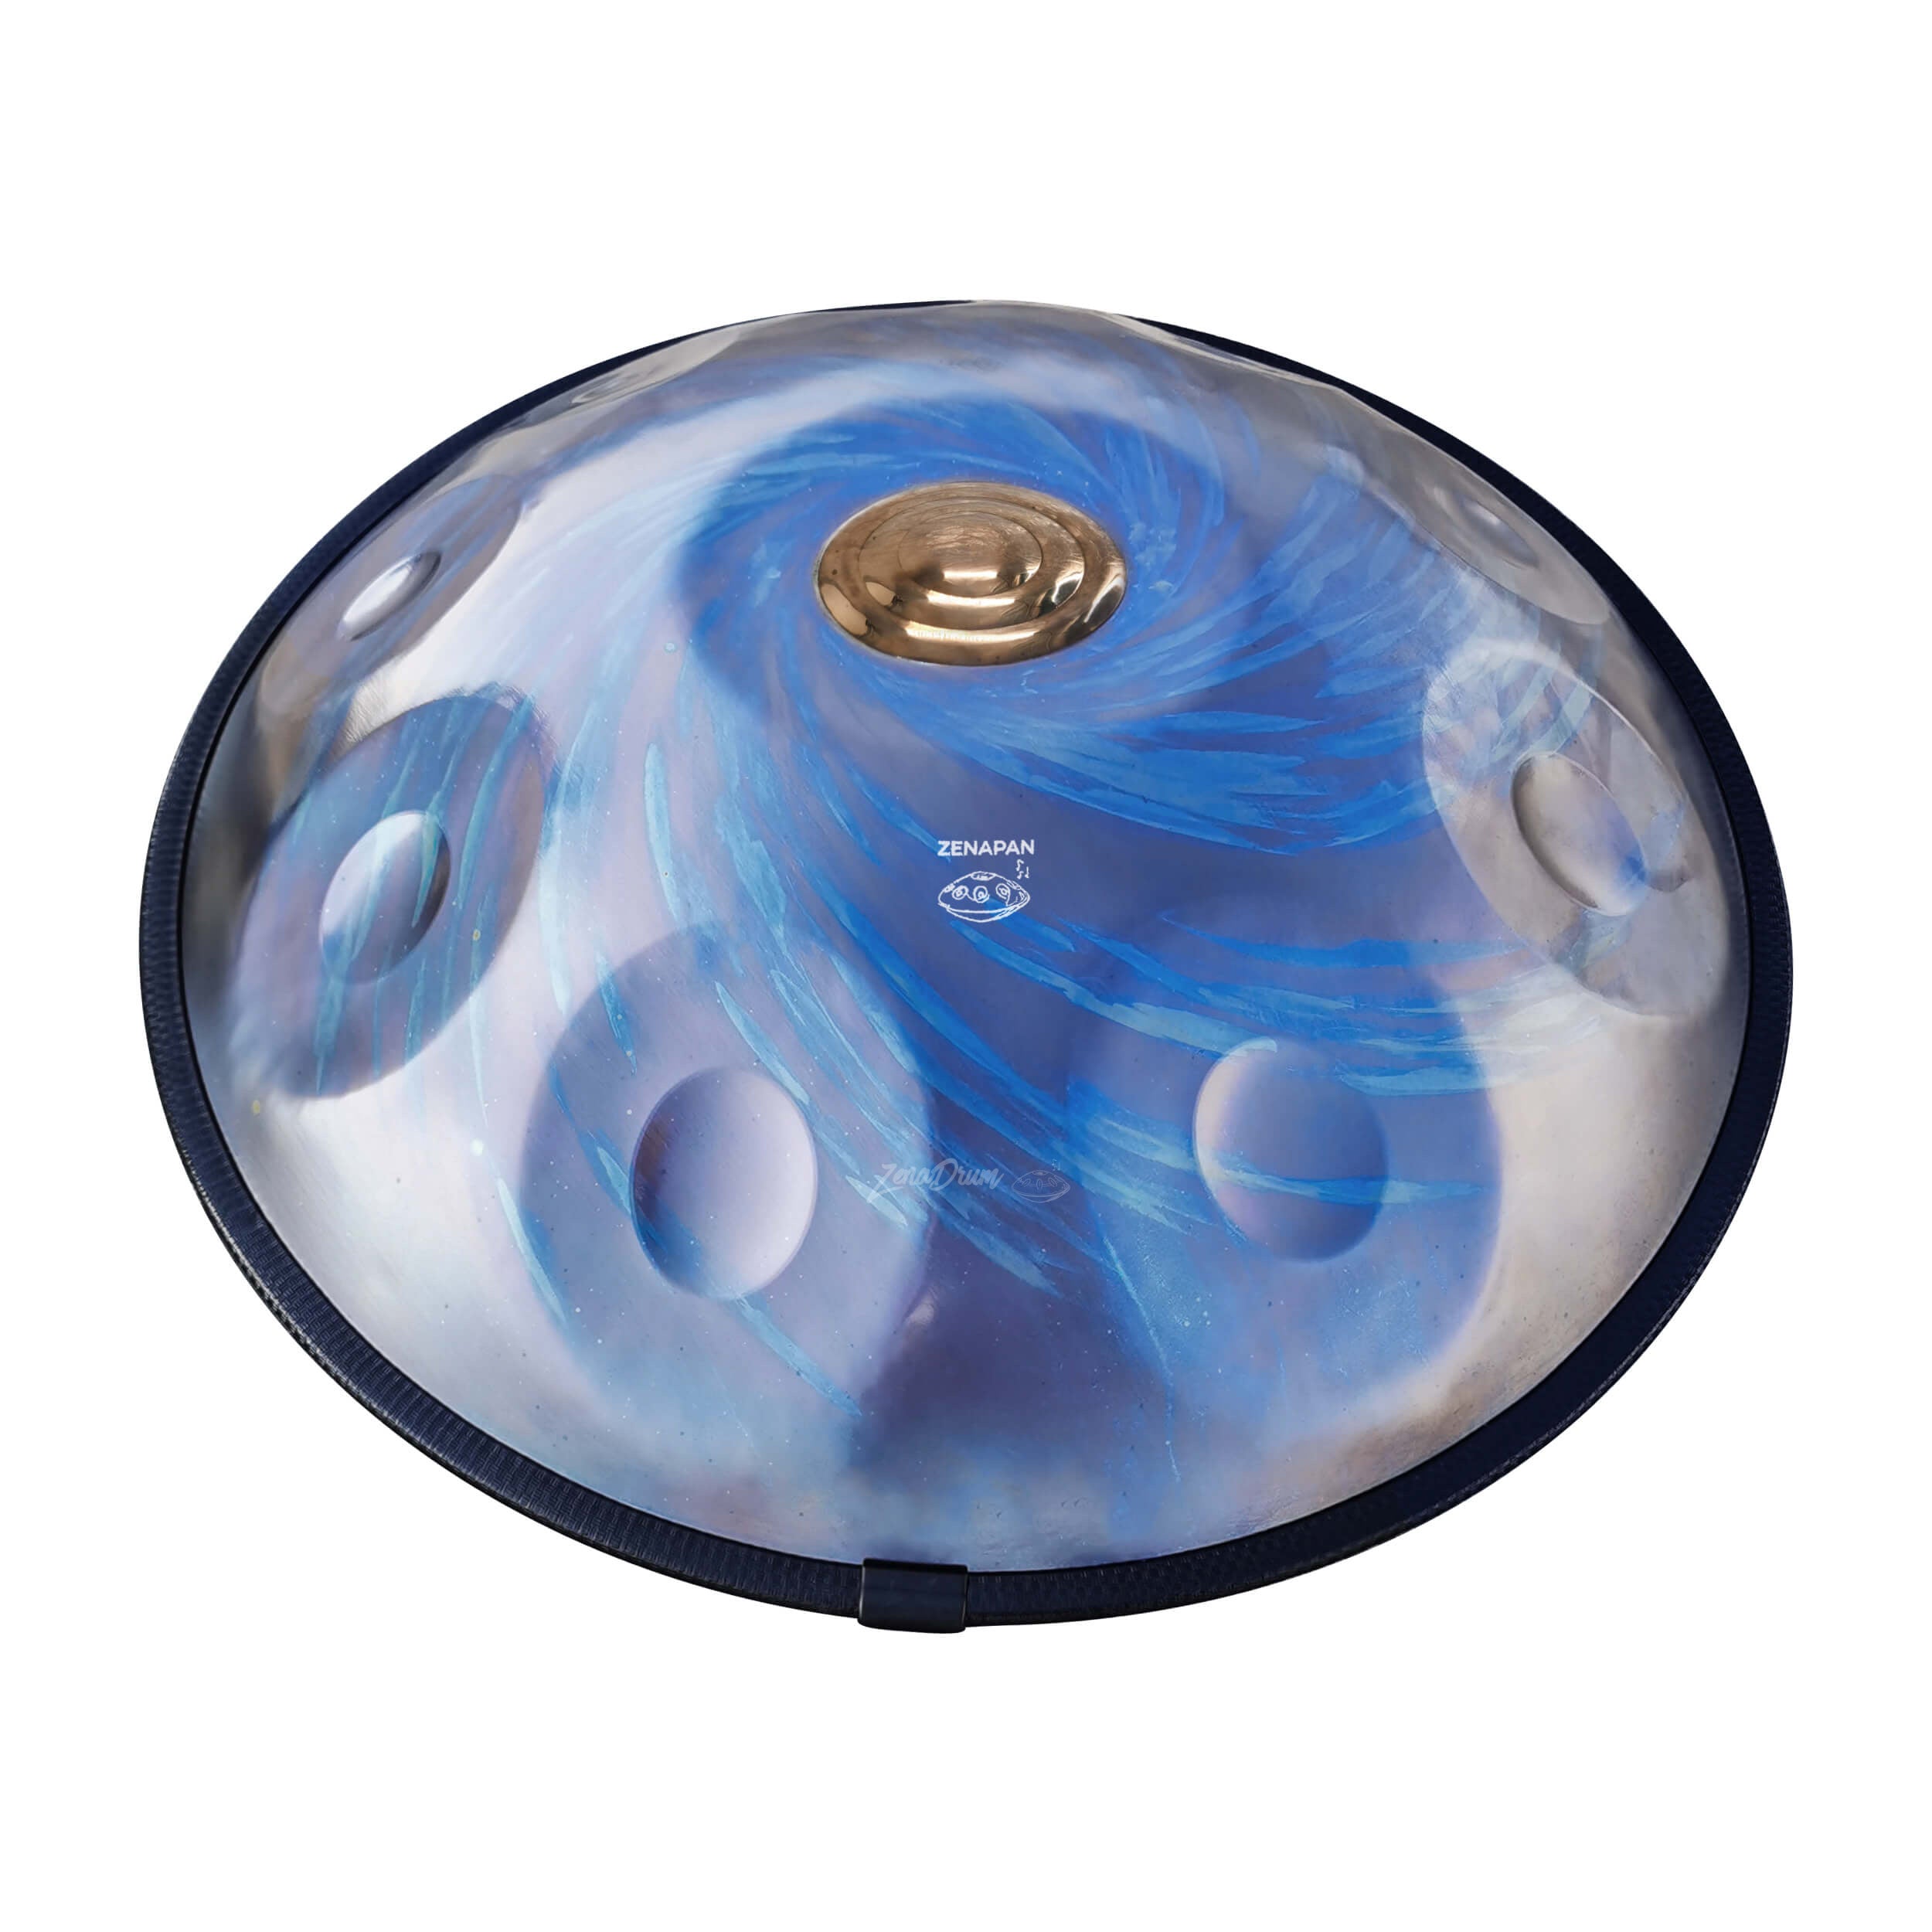 handpan for sale, handpan music, frequency 432hz